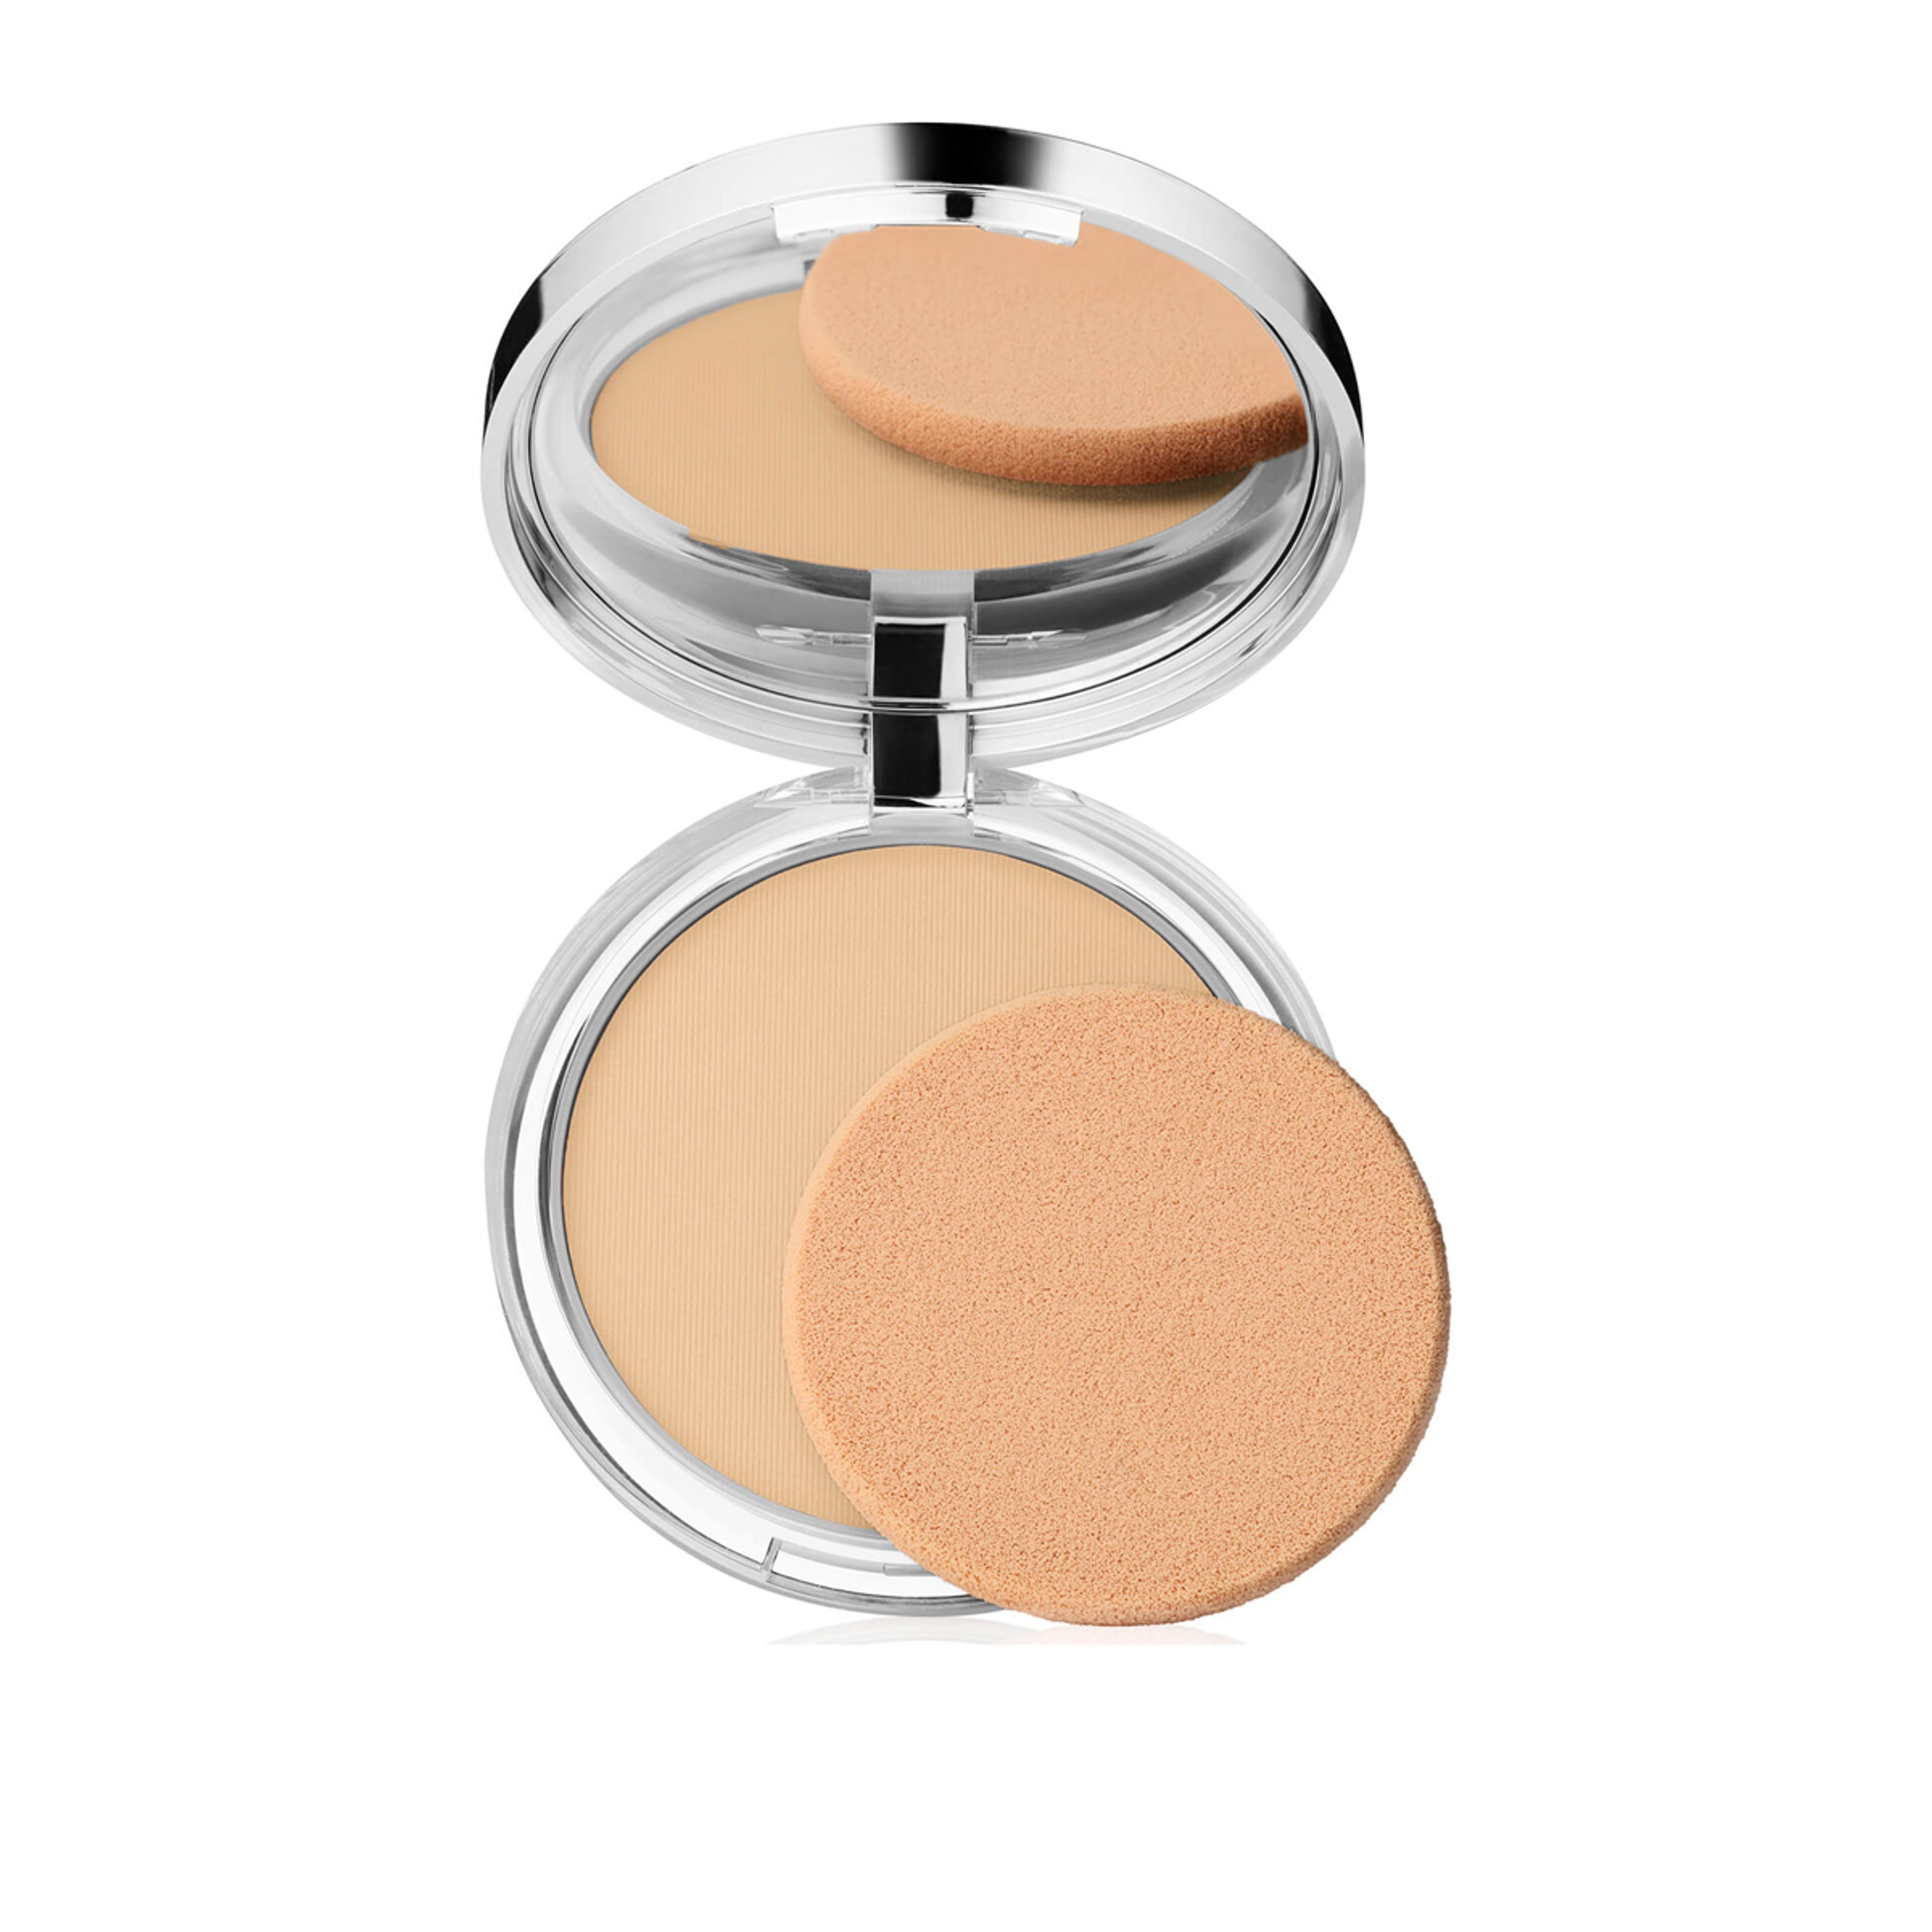 Clinique Stay Matte Sheer Pressed Powder 1